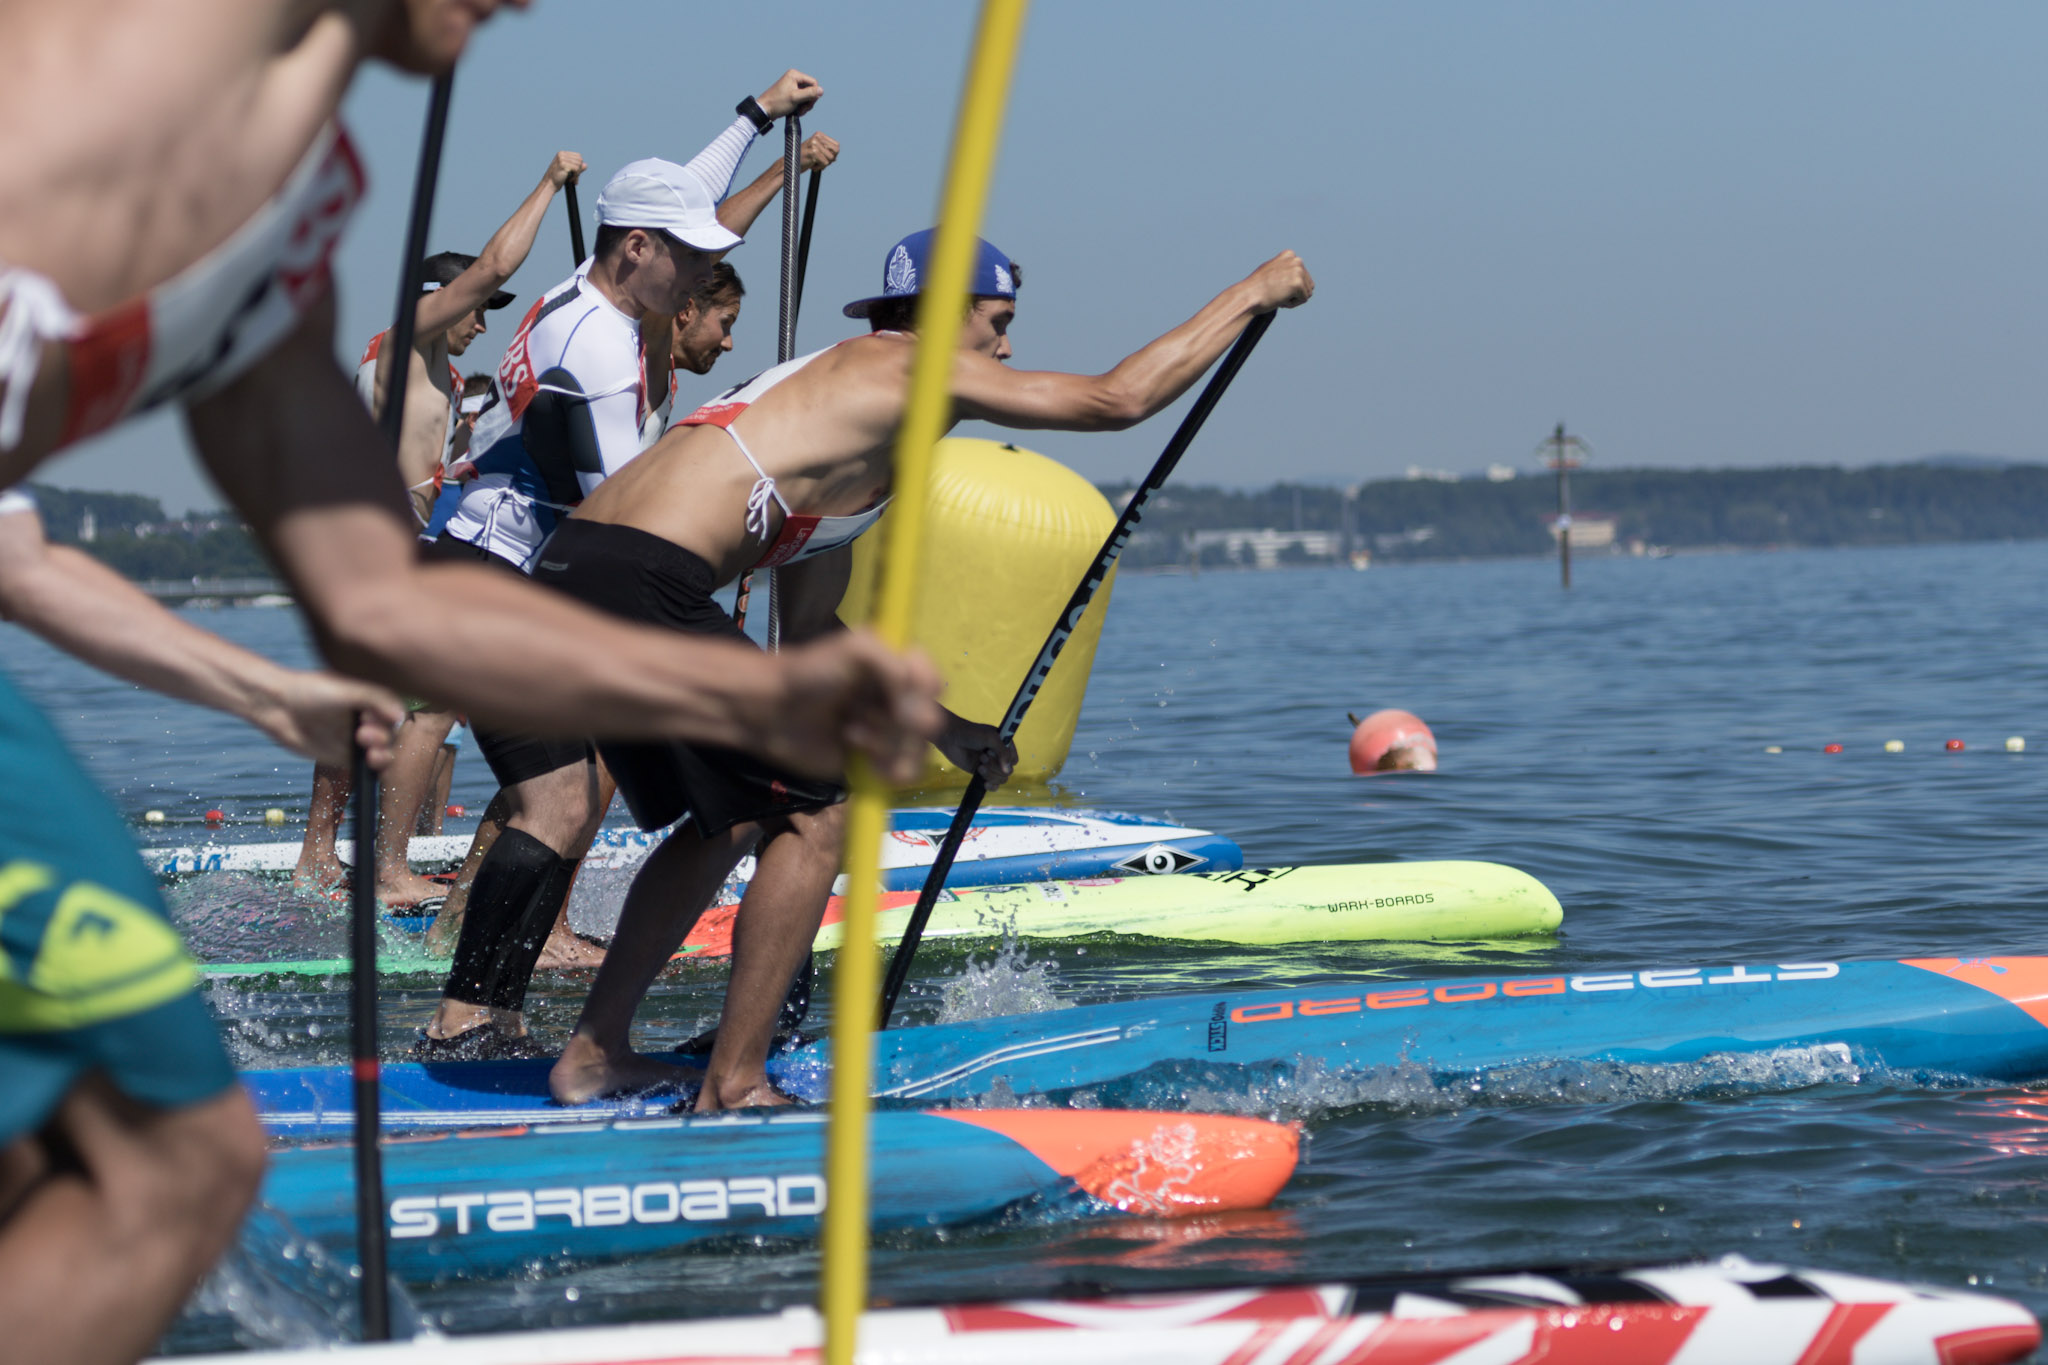 Bodensee SUP Cup 2018